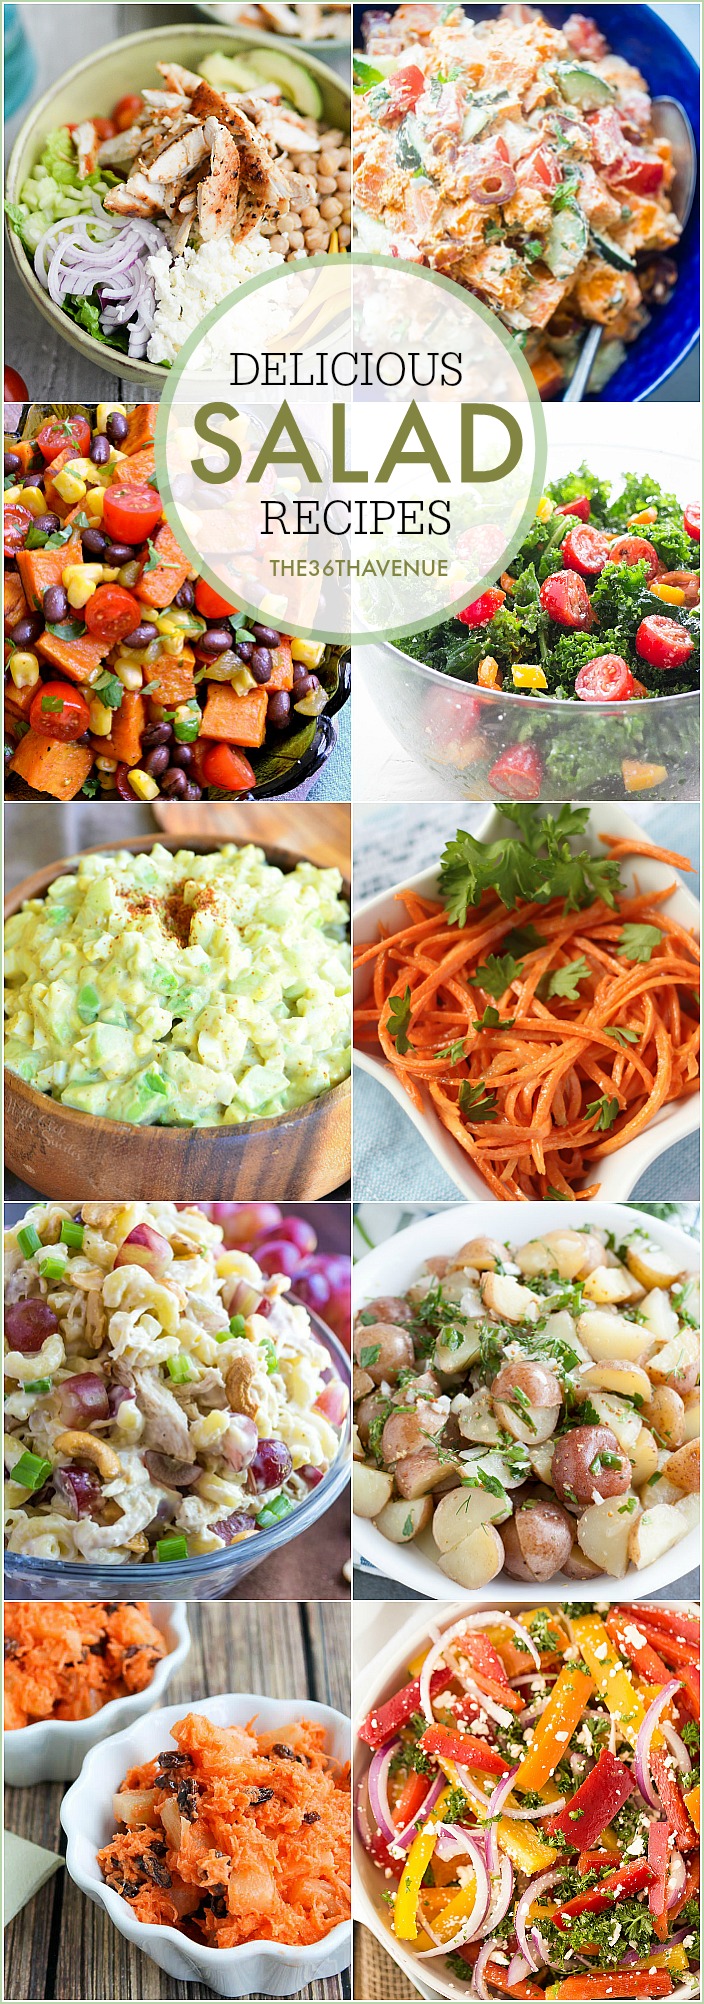 Easy and delicious Salad Recipes that are perfect to serve as side or main dishes. These salad recipes are great  alternatives to other main dishes.